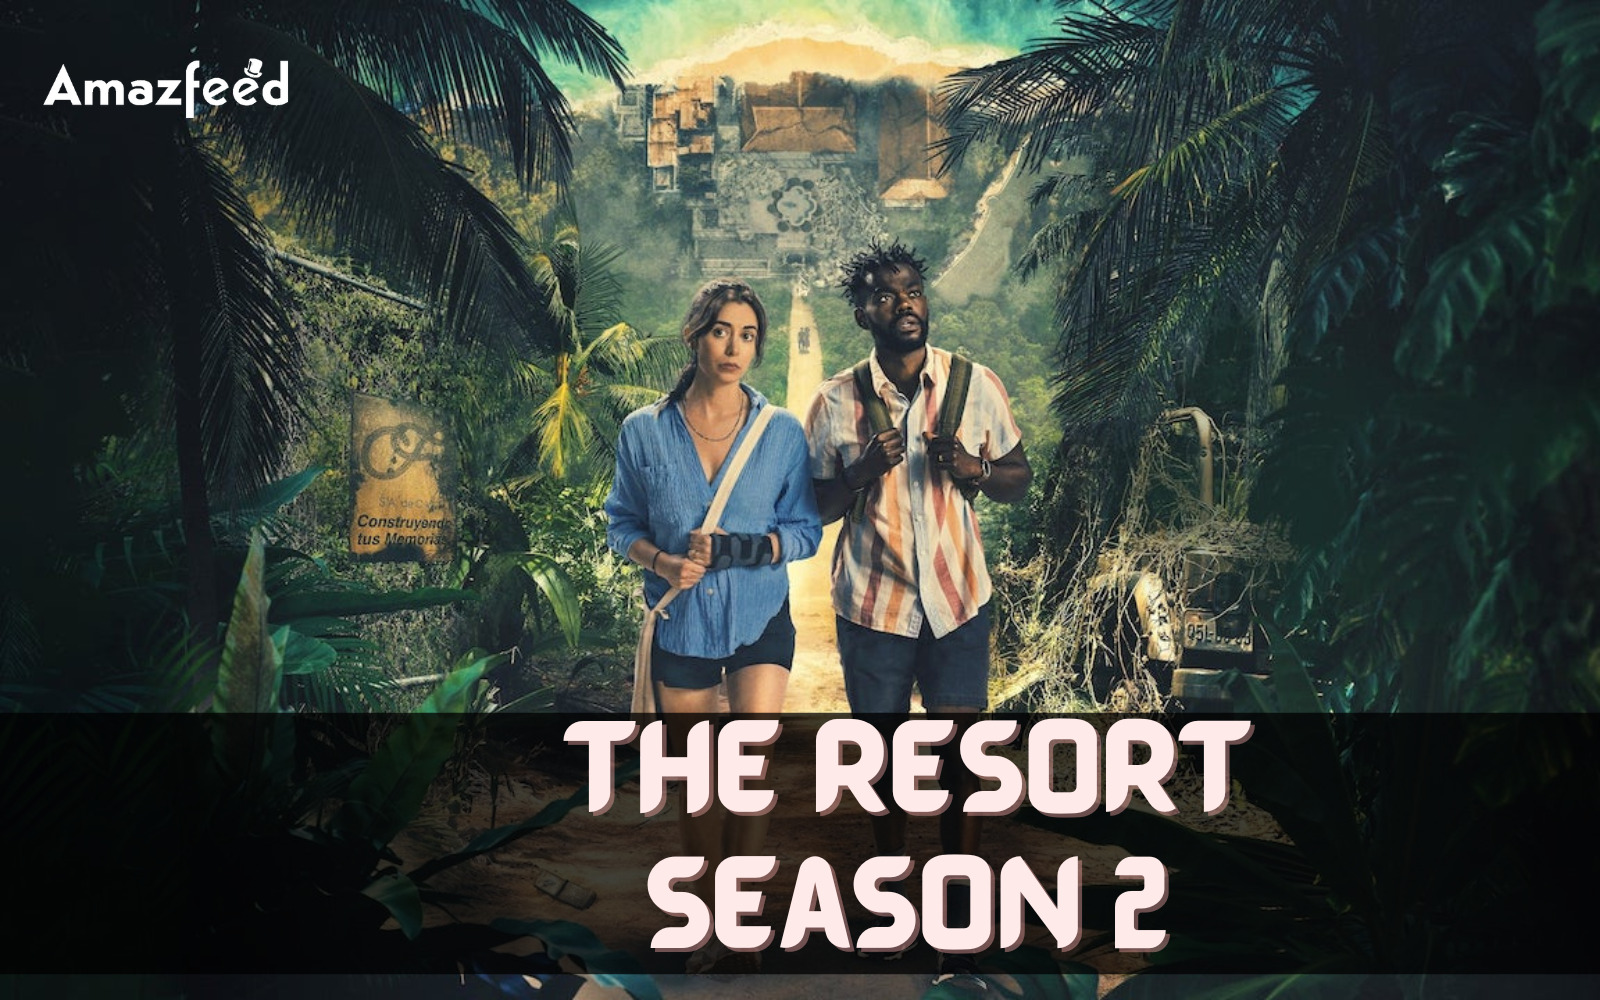 How fans are excited about The Resort Season 2